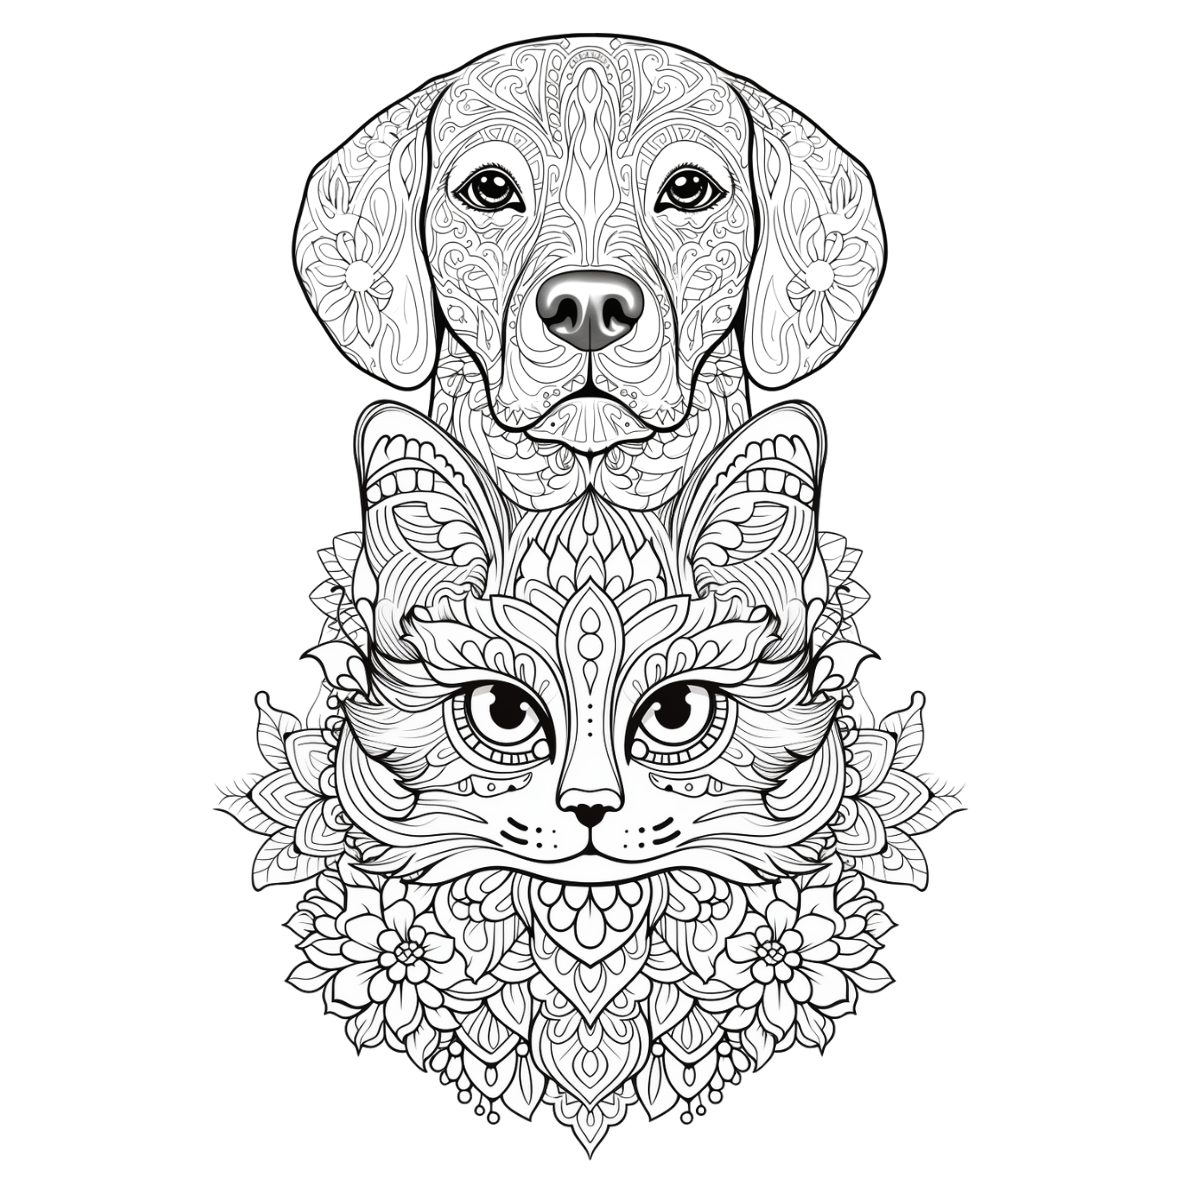 Paws whiskers bundle mandalas printable coloring book for cats do â waiting for colors